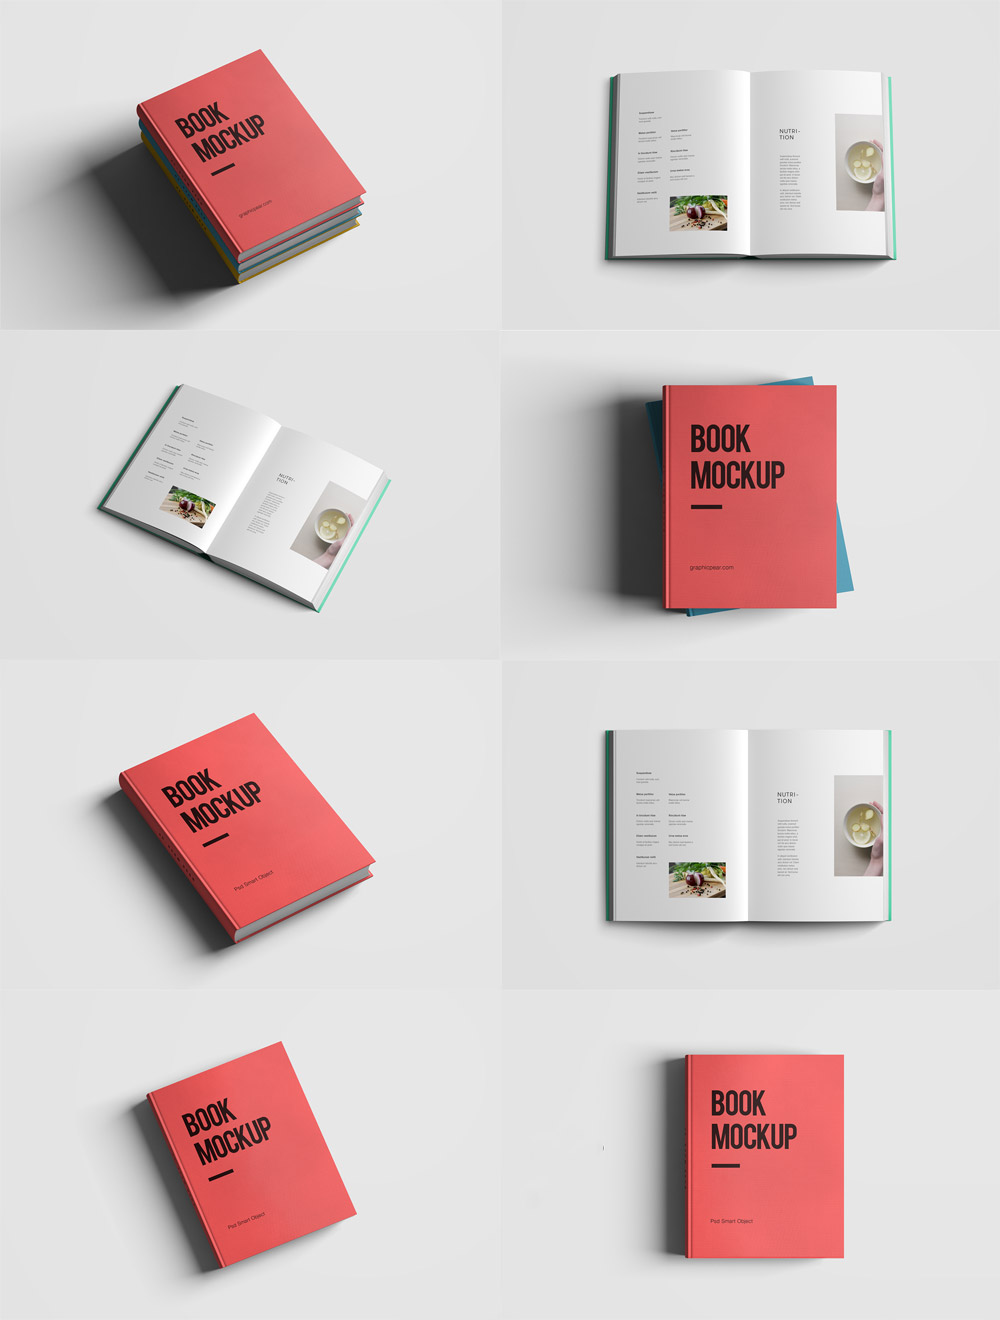 Realistic Book Mockup Template Pack Free PSD Download ...